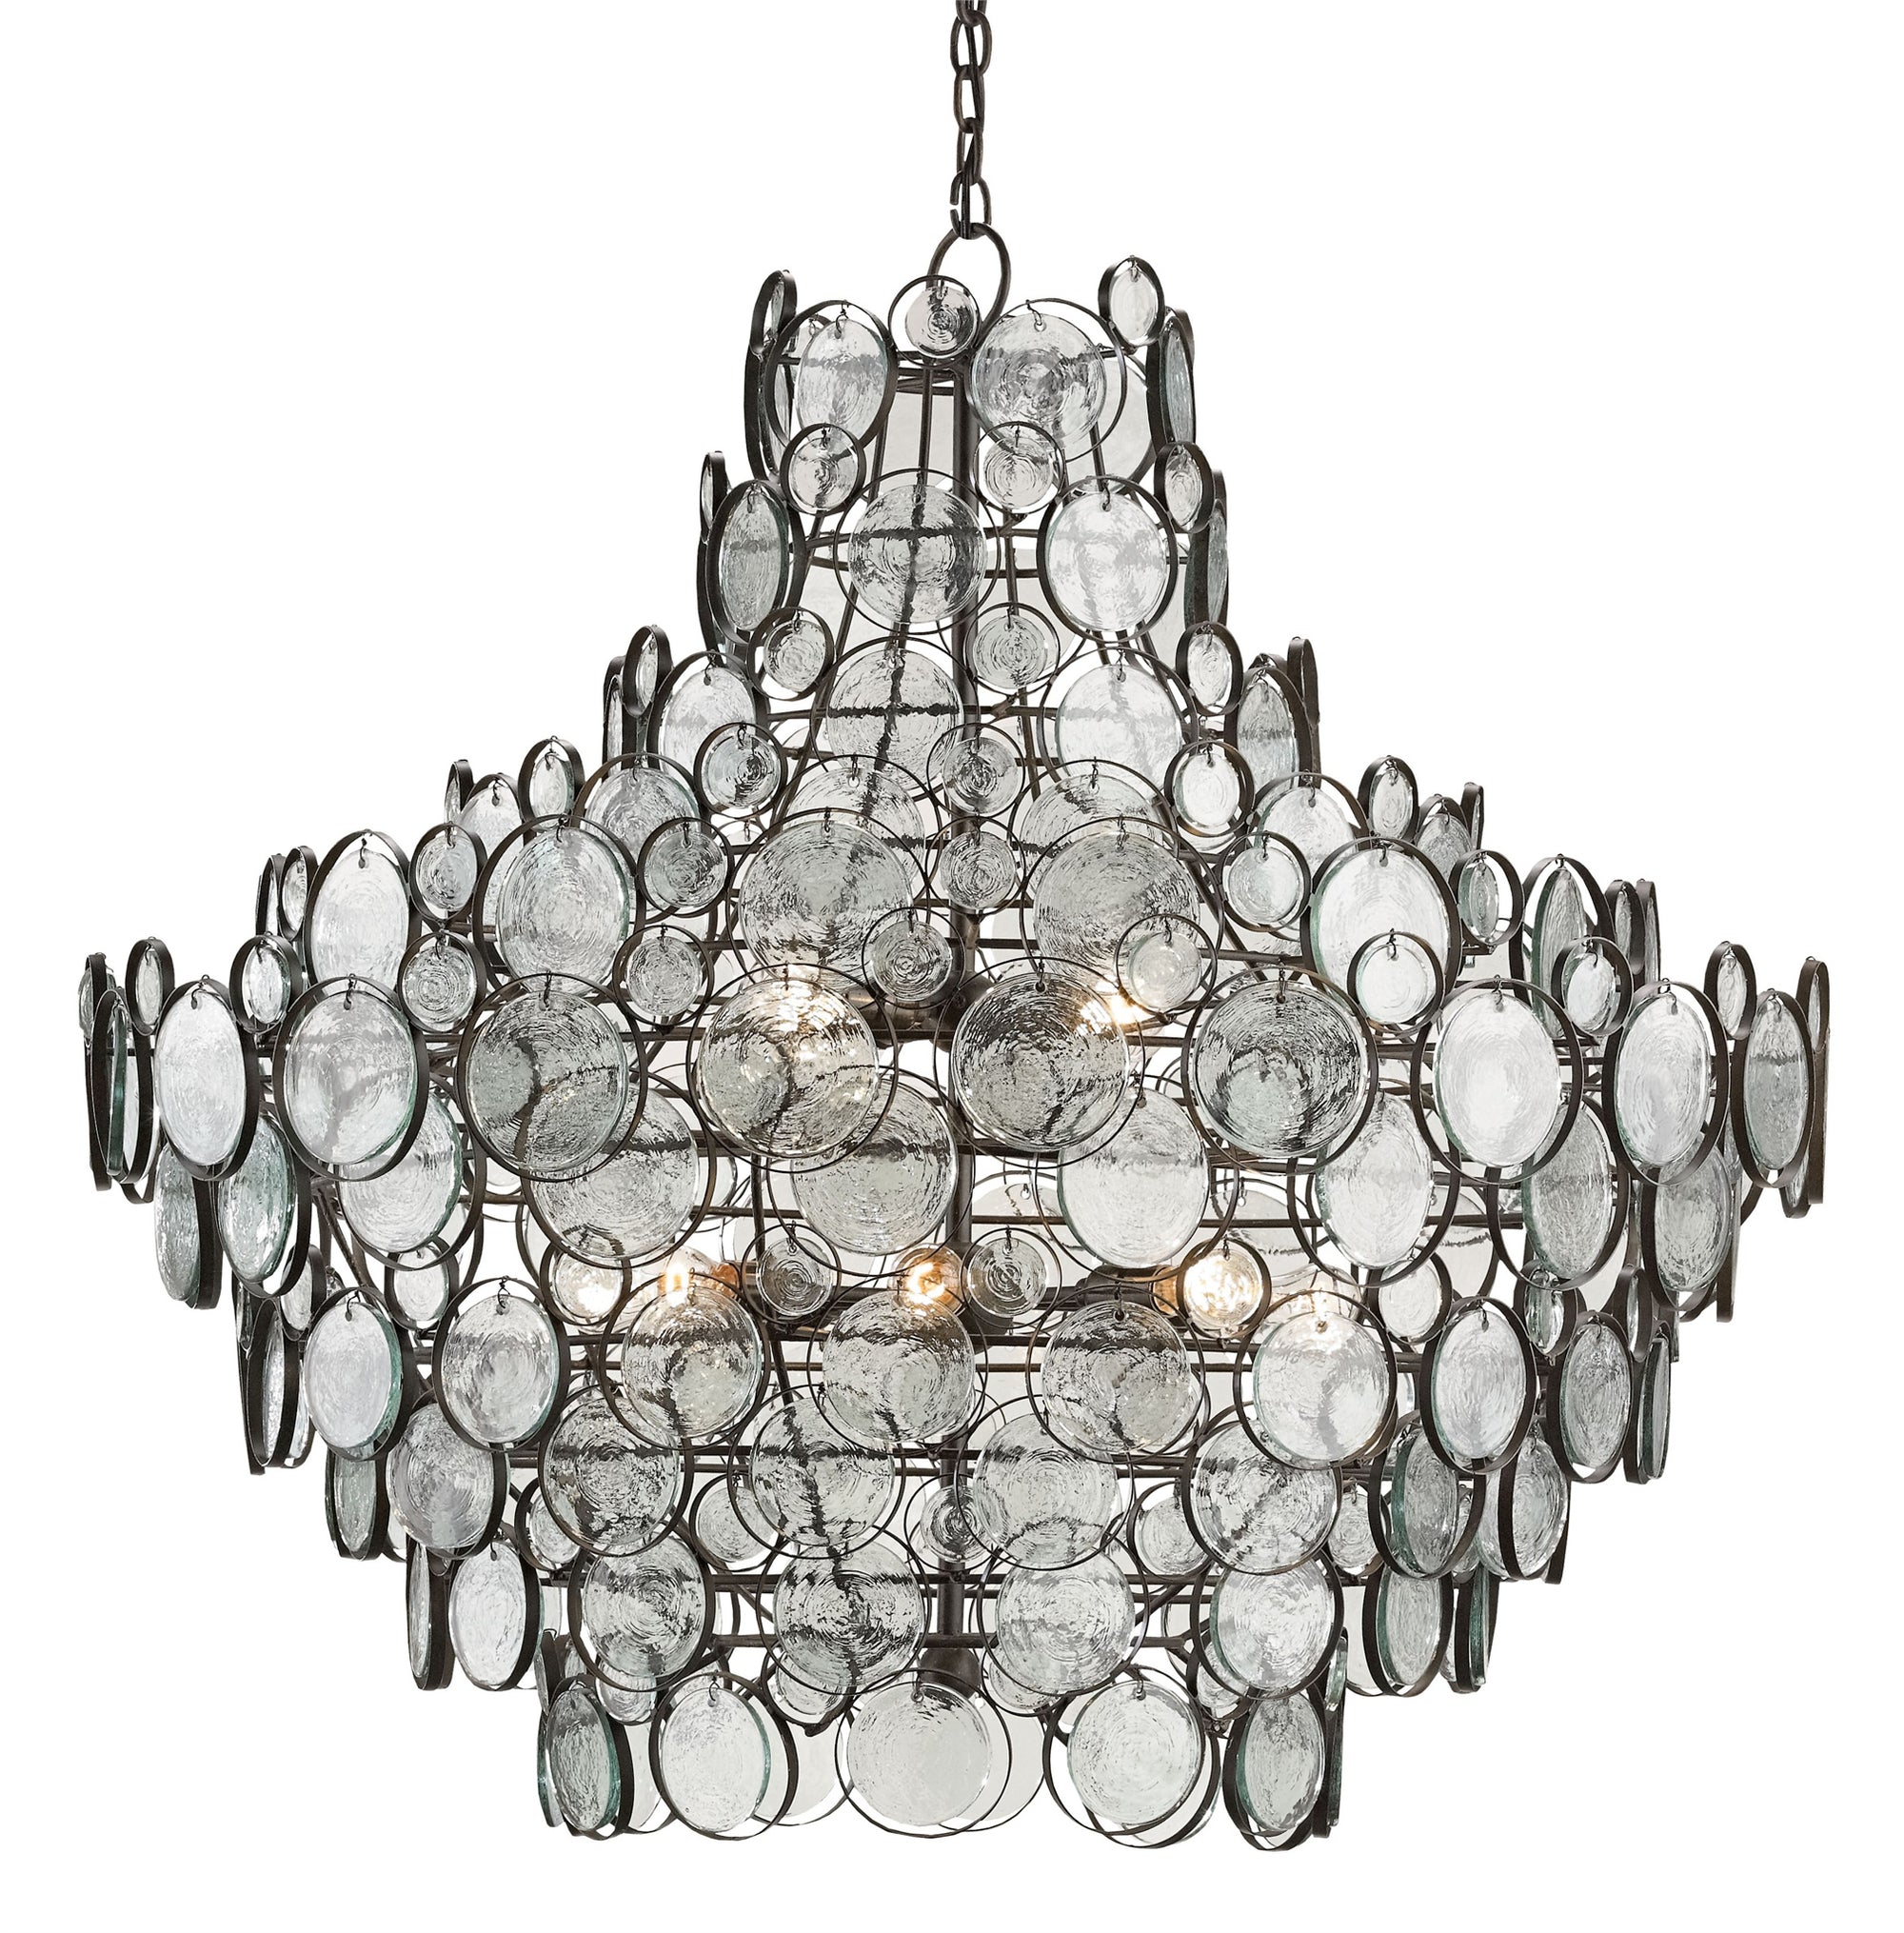 Currey and Company Galahad Chandelier, The Alley Exchange Chandeliers 